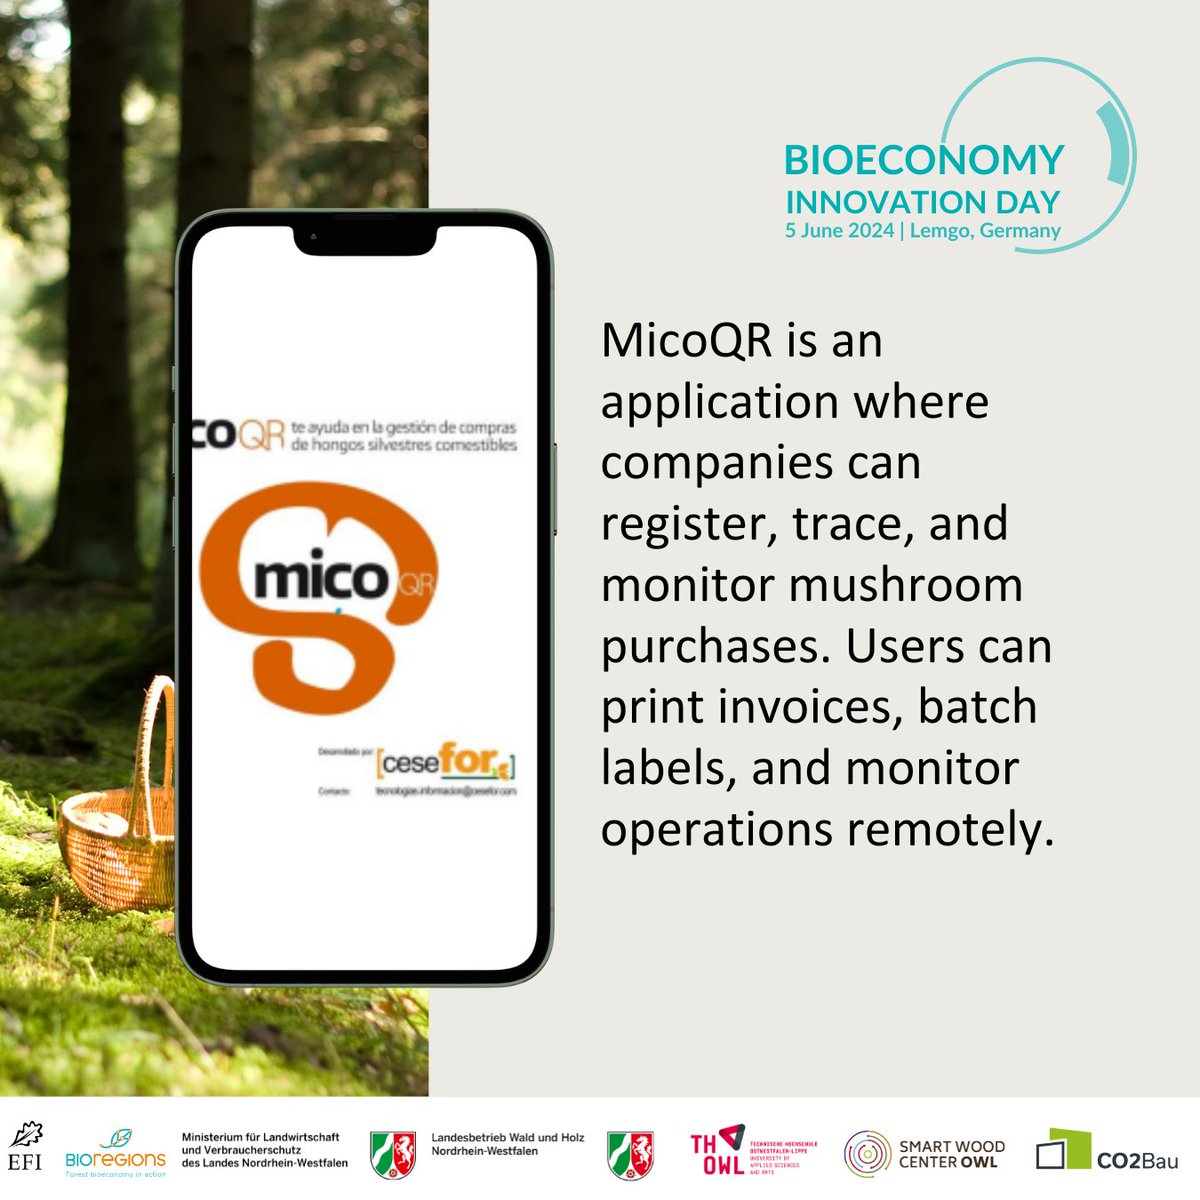 📣 Meet our speakers & innovators! 👇 Learn more about @FCesefor's MicoQR at the Bioeconomy Innovation Day 2024 event in Lemgo, Germany, on 5 June. 🎟 Get your ticket and see you in Lemgo! bioregions.efi.int/bioeconomy-inn… @europeanforest @WaldundHolzNRW @THochschuleOWL